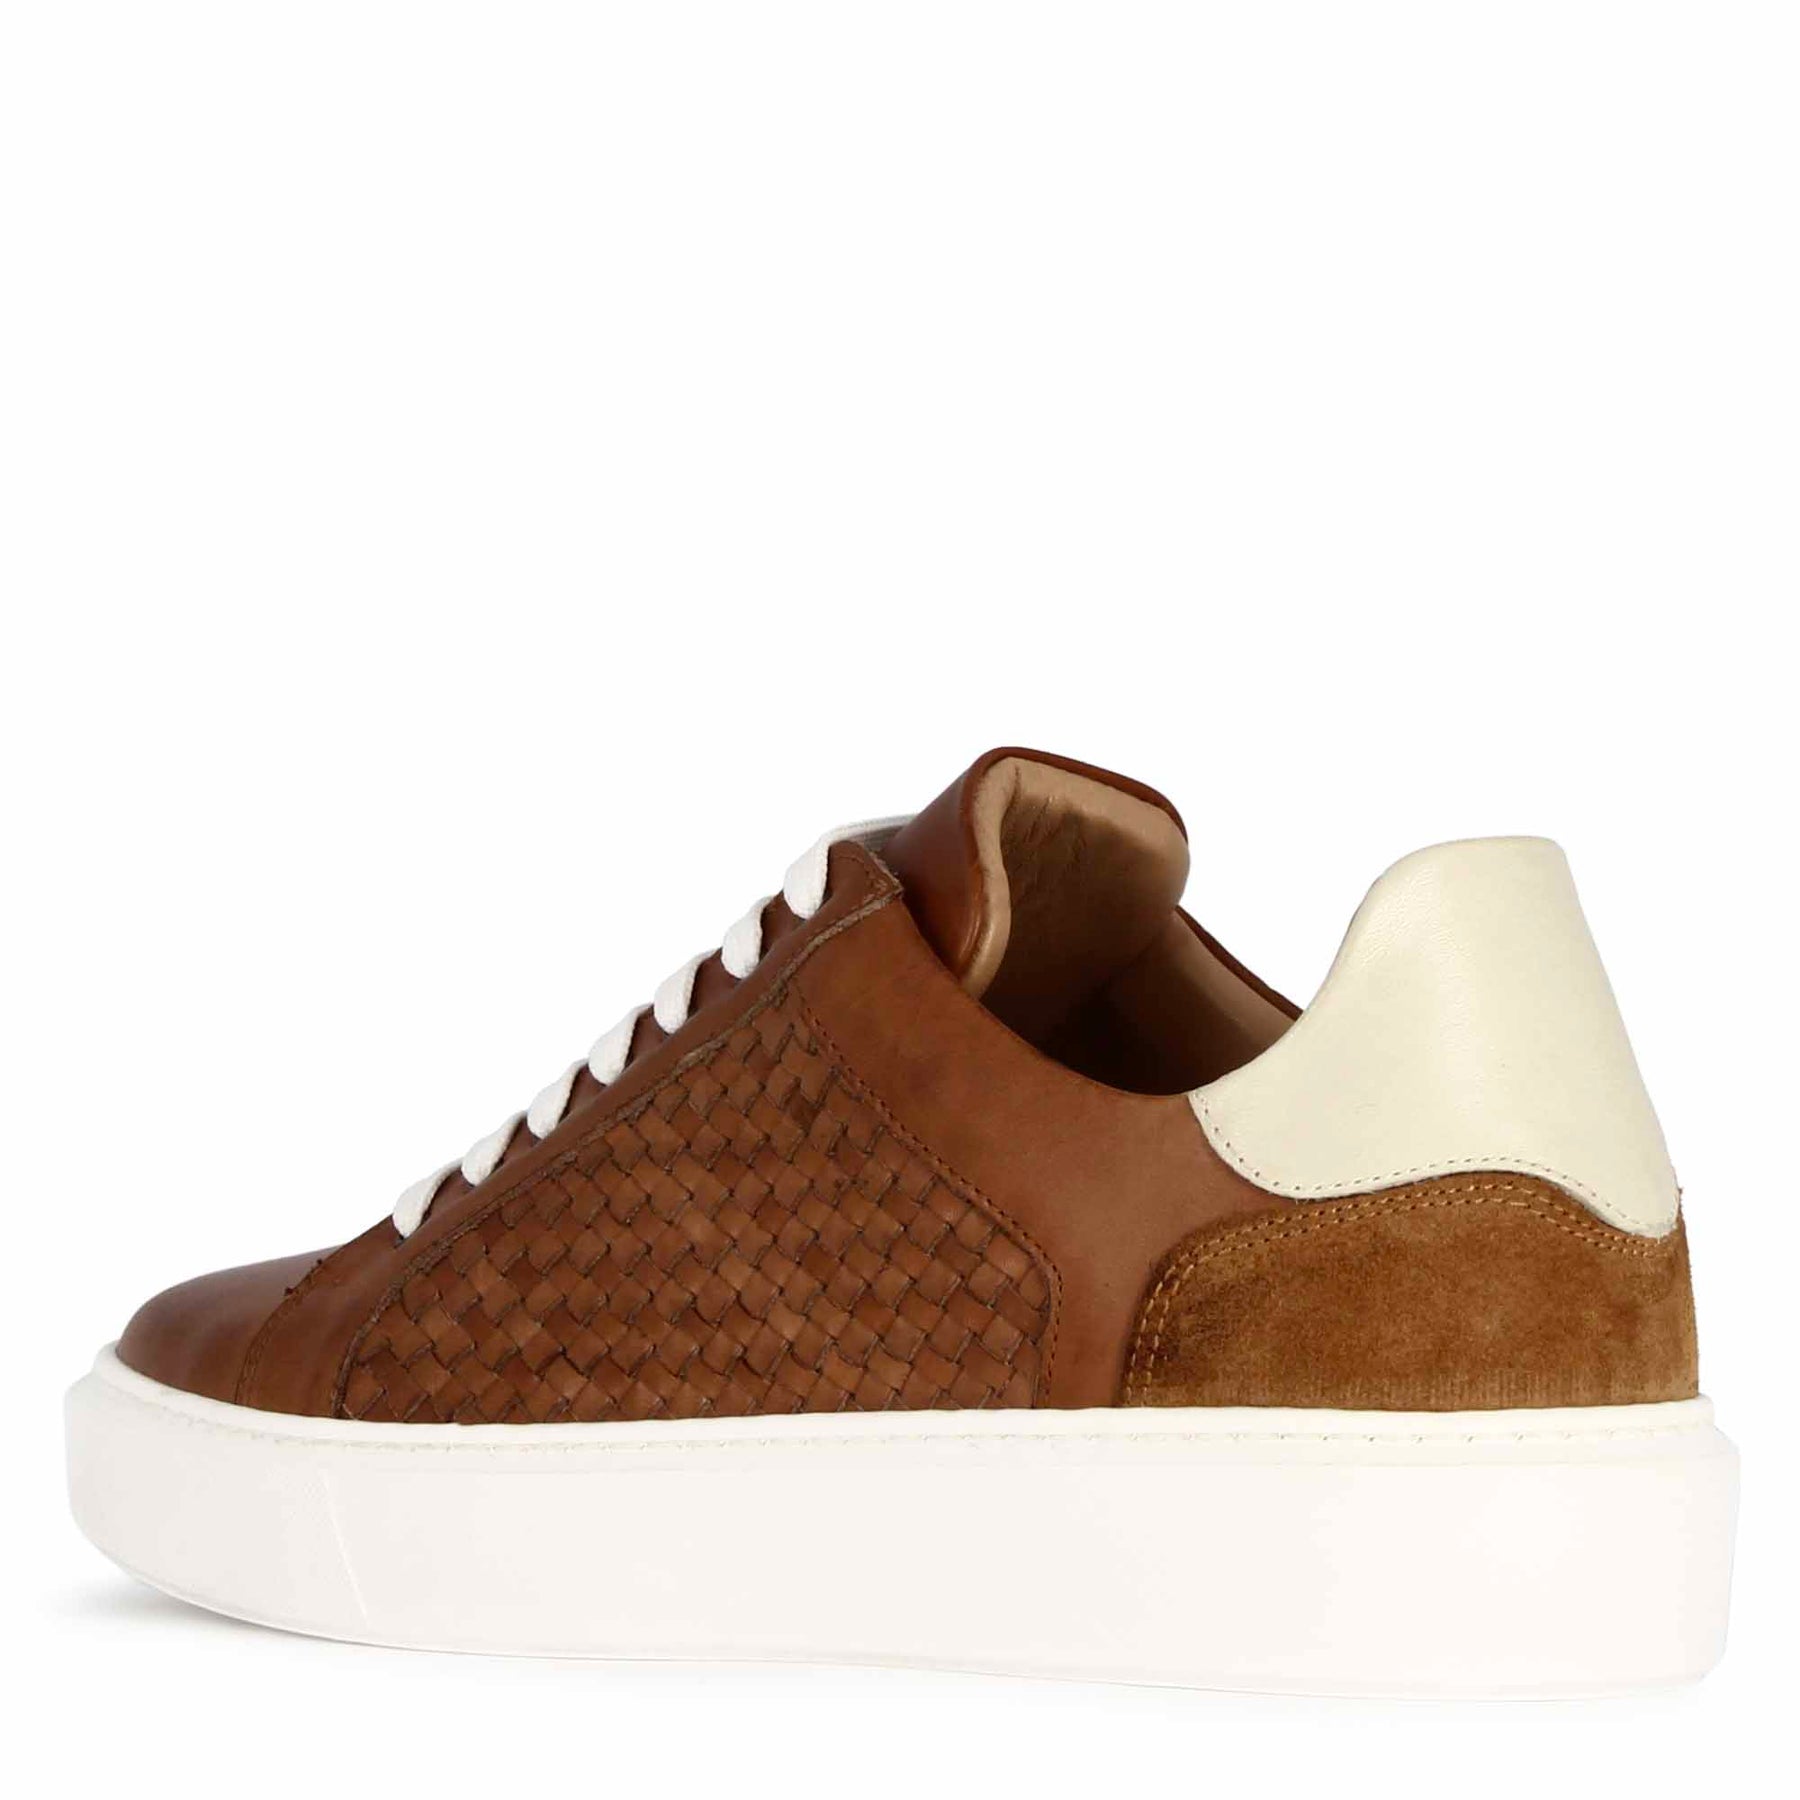 Casual brown woven leather Italian men's trainers